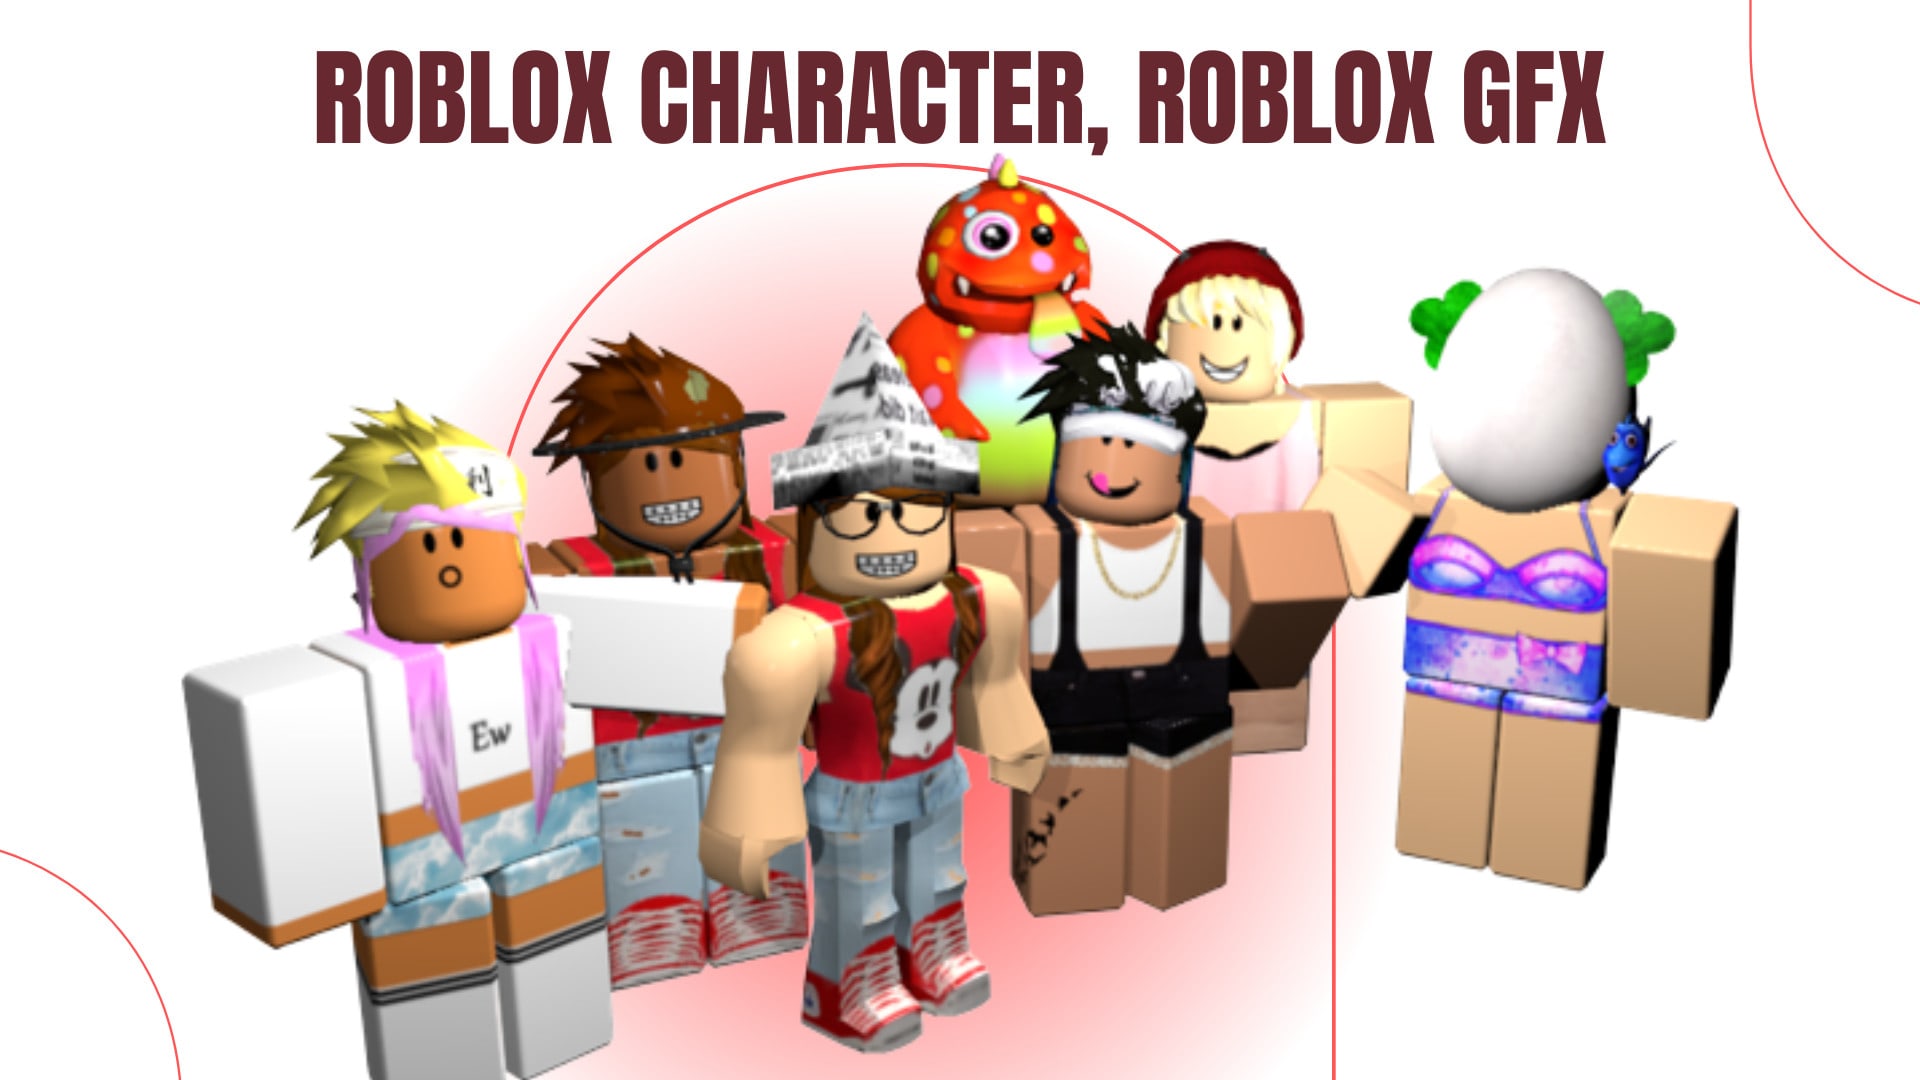 Everything You Need to Know About Crafting a Good Roblox Avatar